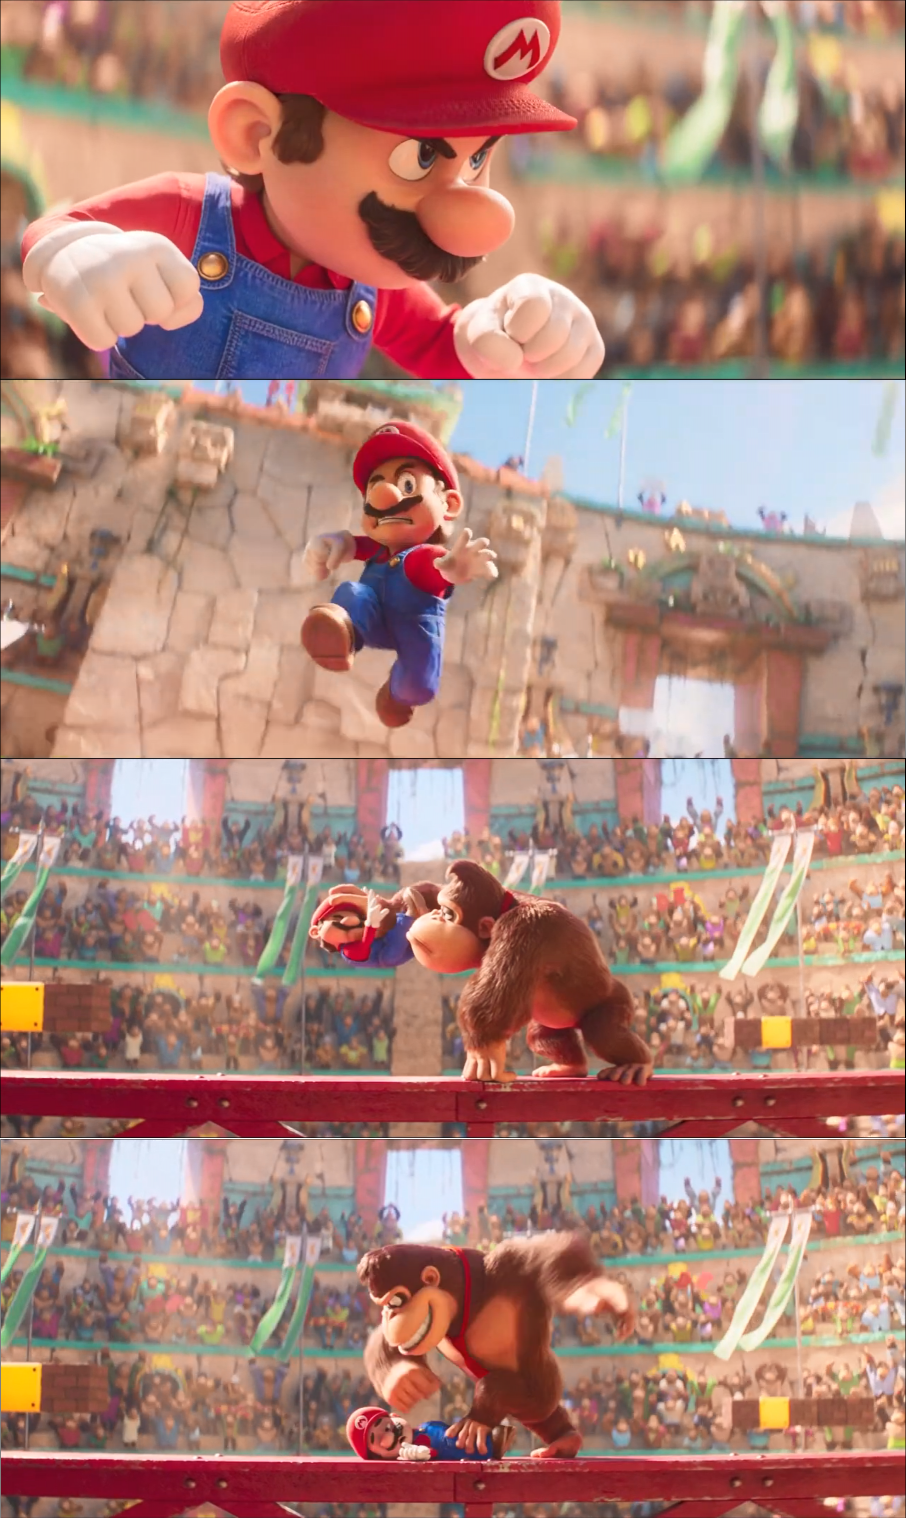 Mario pounded by Donkey Kong Blank Meme Template